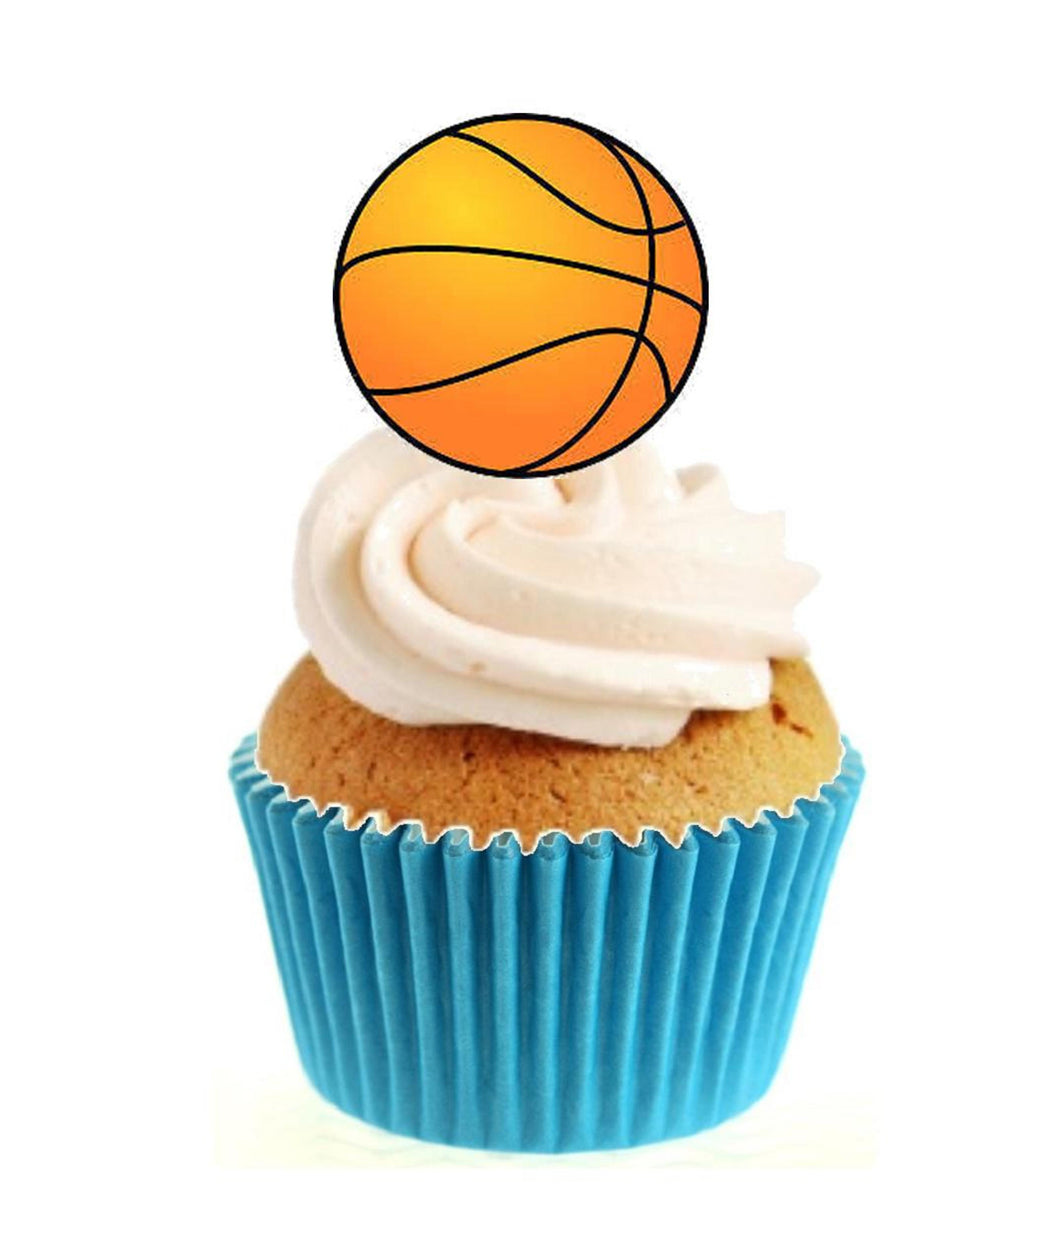 Basketball Stand Up Cake Toppers (12 pack)  Pack contains 12 images printed onto premium wafer card